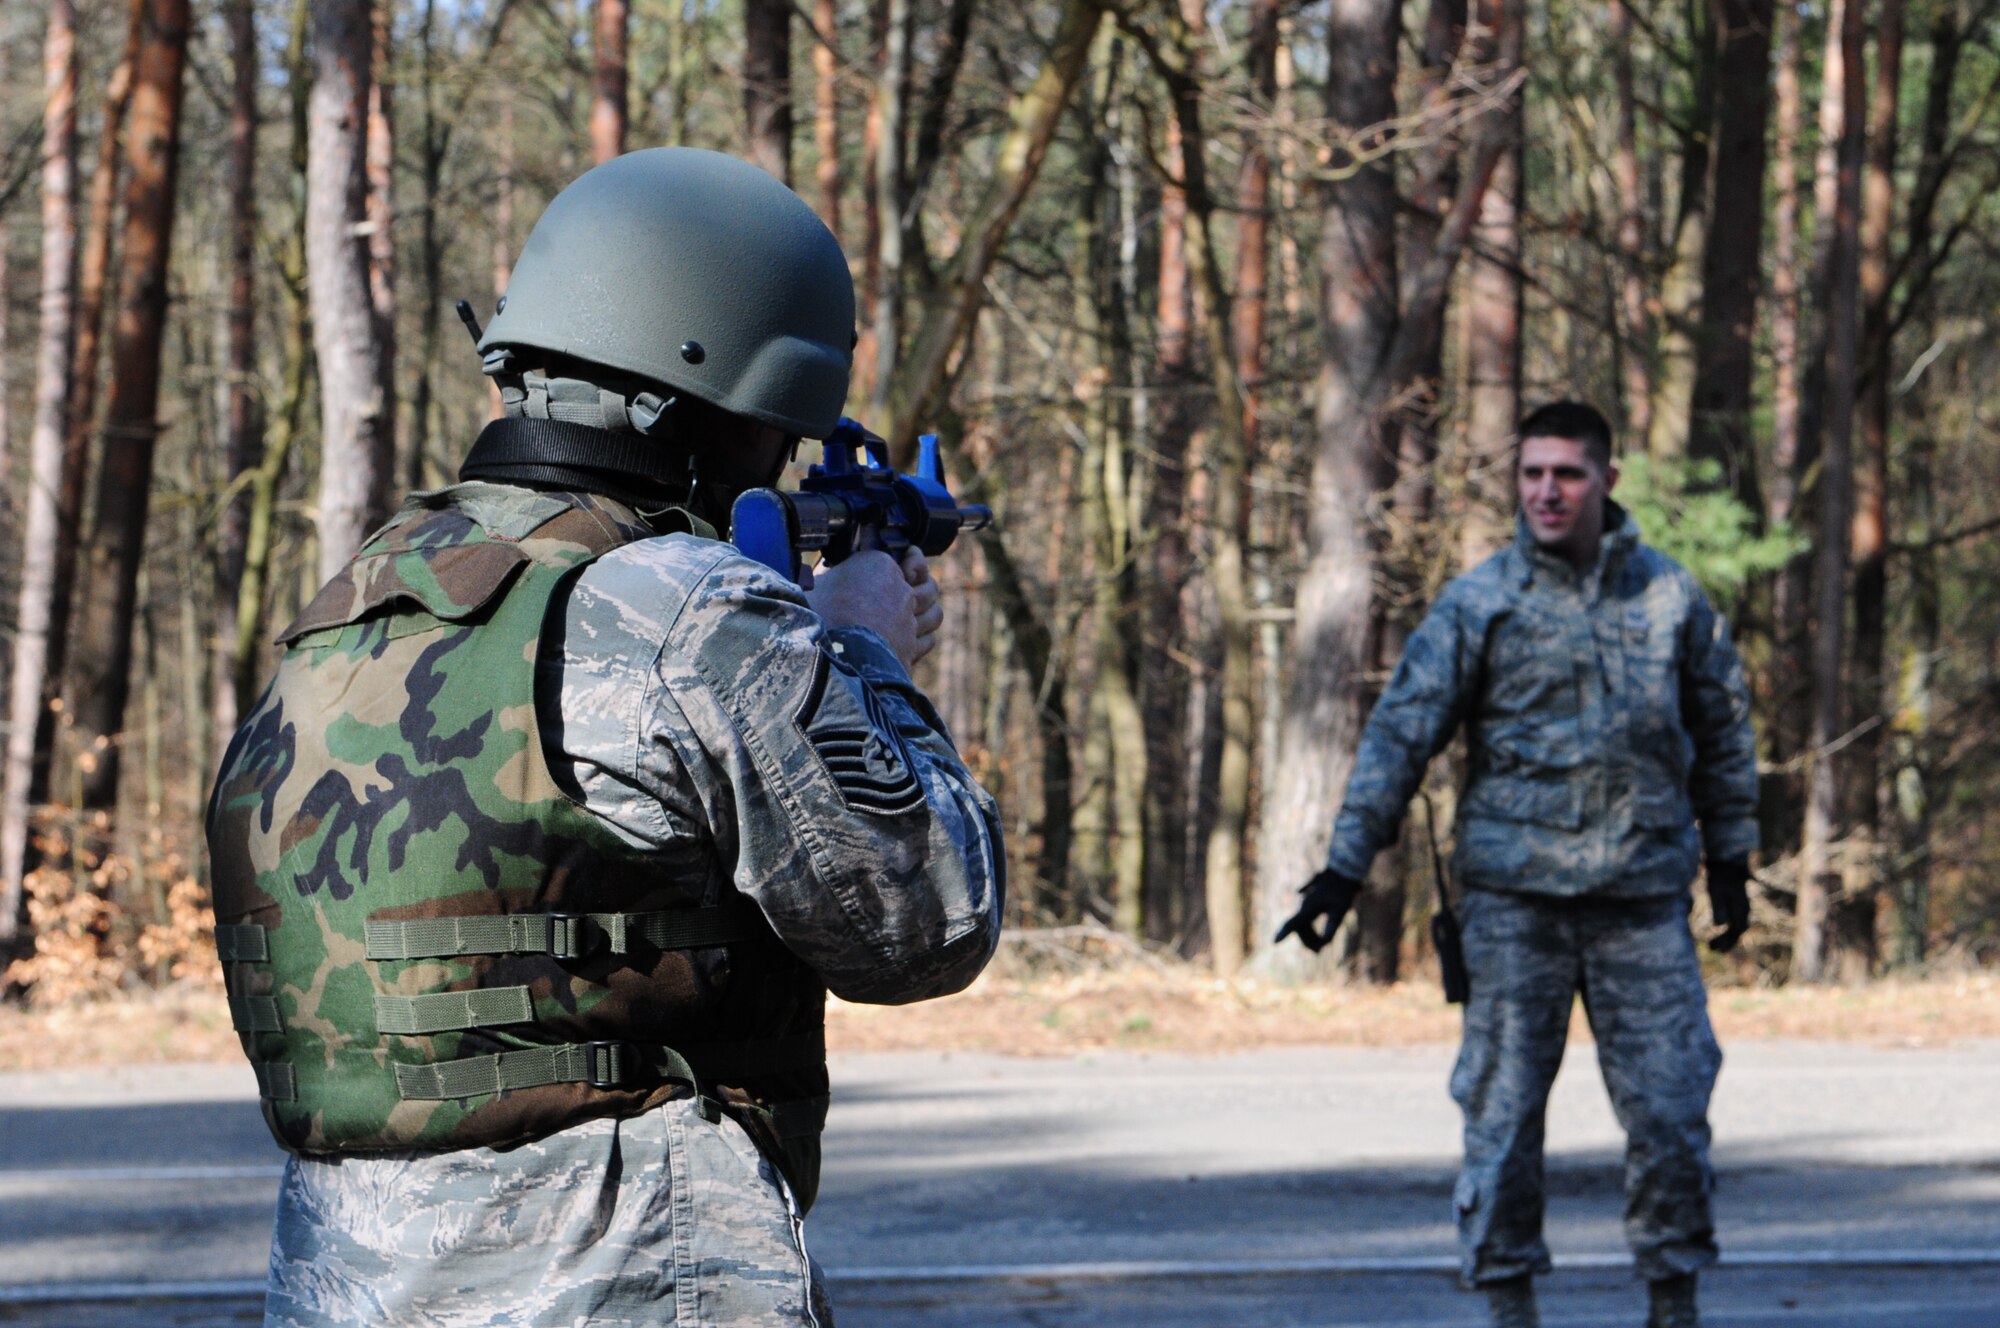 175th Fire and Emergency Services members perform a search and rescue exercise during Silver Flag 2016 at Ramstein Air Base, March 9. Silver Flag is an every 36 months required training for Air Force civil engineer specialties. (U.S. Air National Guard photo by Senior Airman Erica Rodriguez)